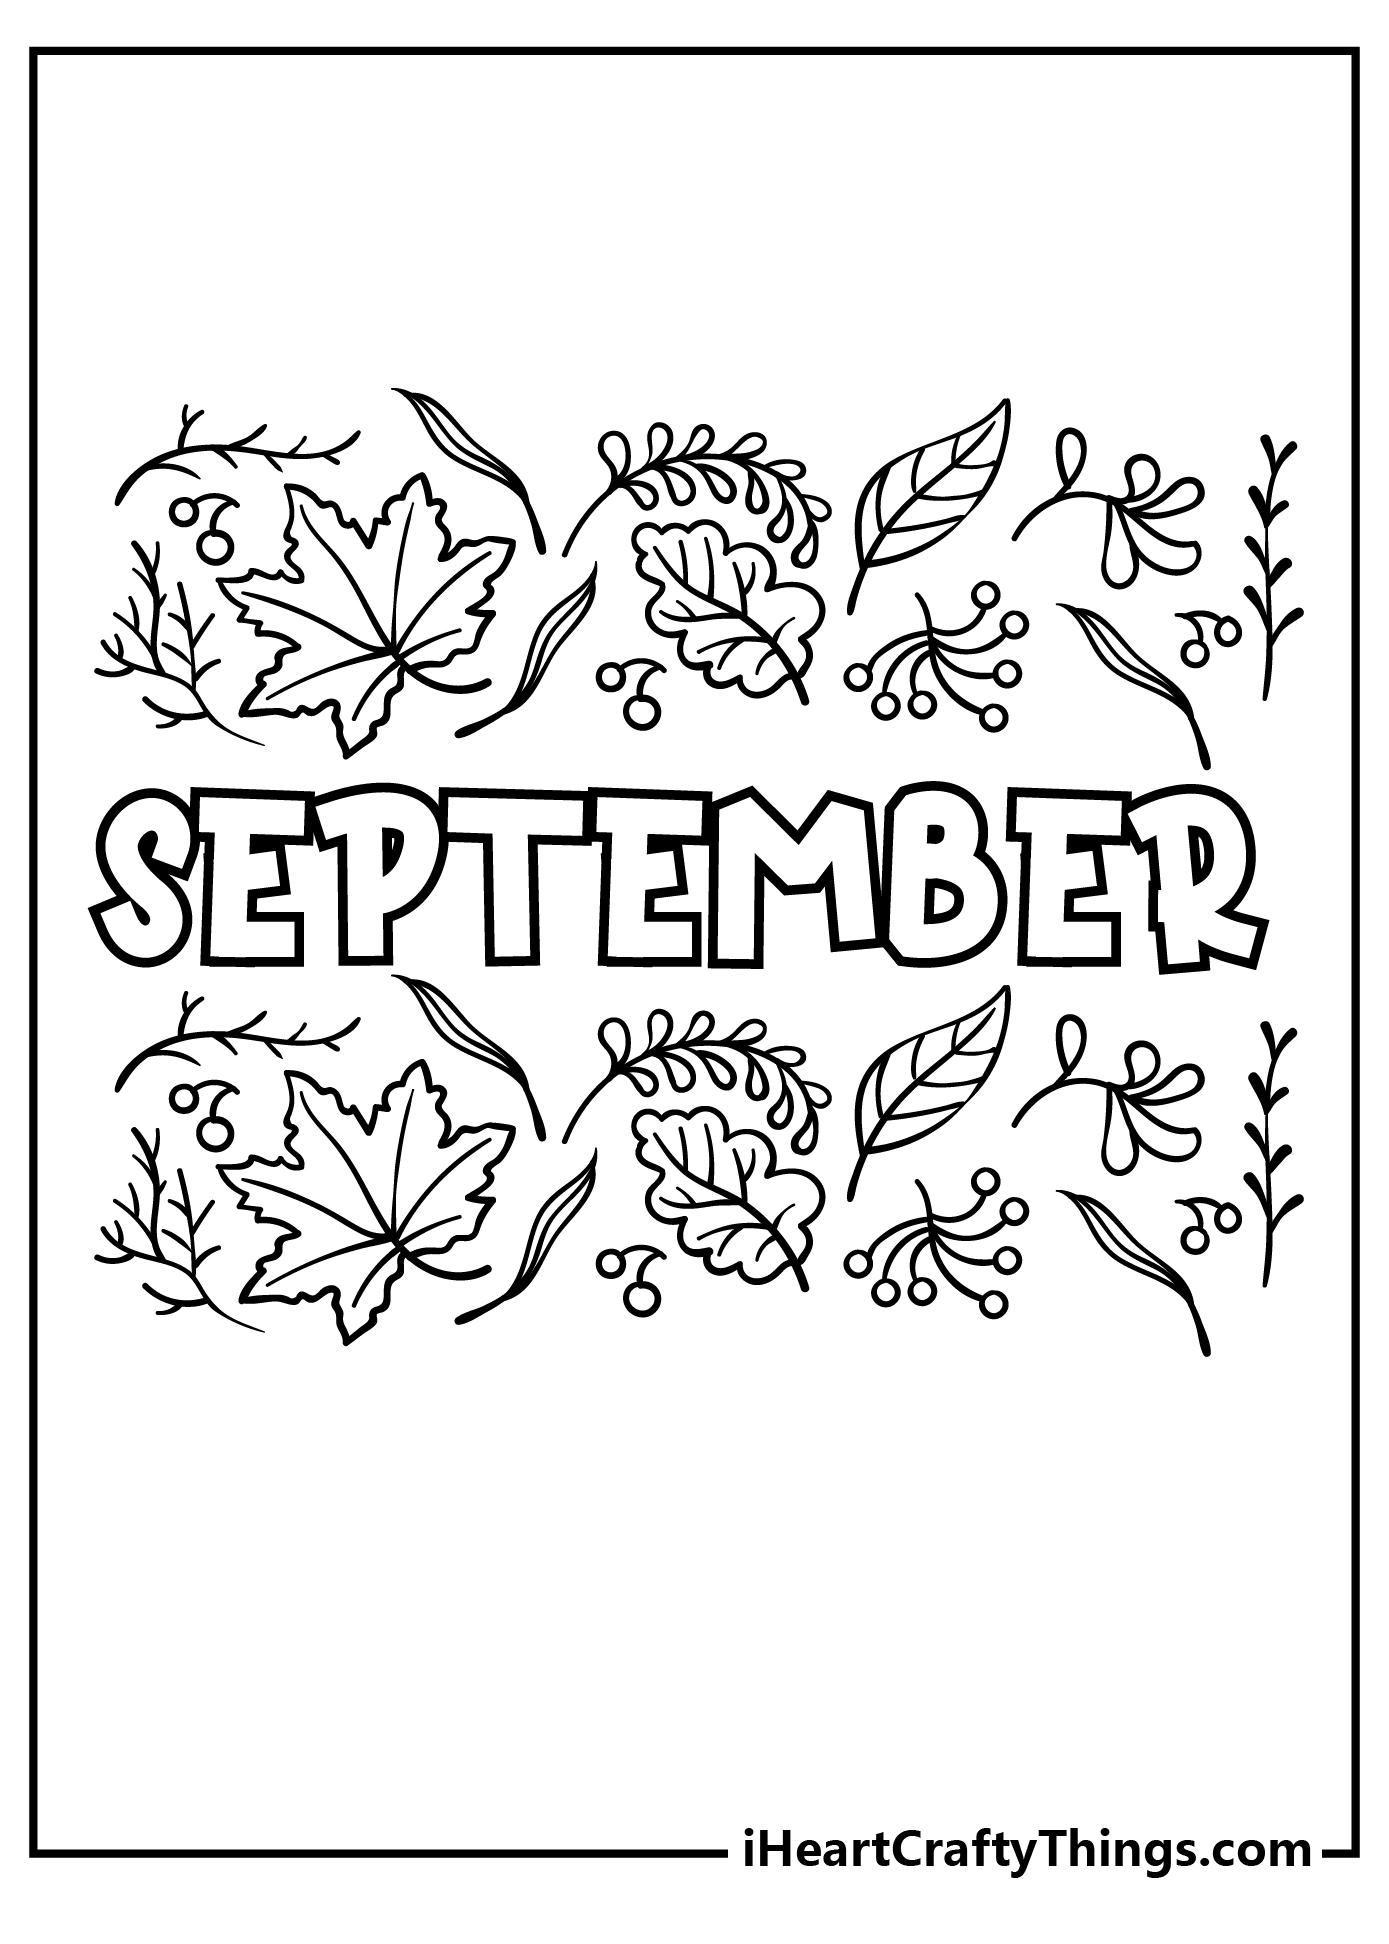 September Coloring Pages free pdf download